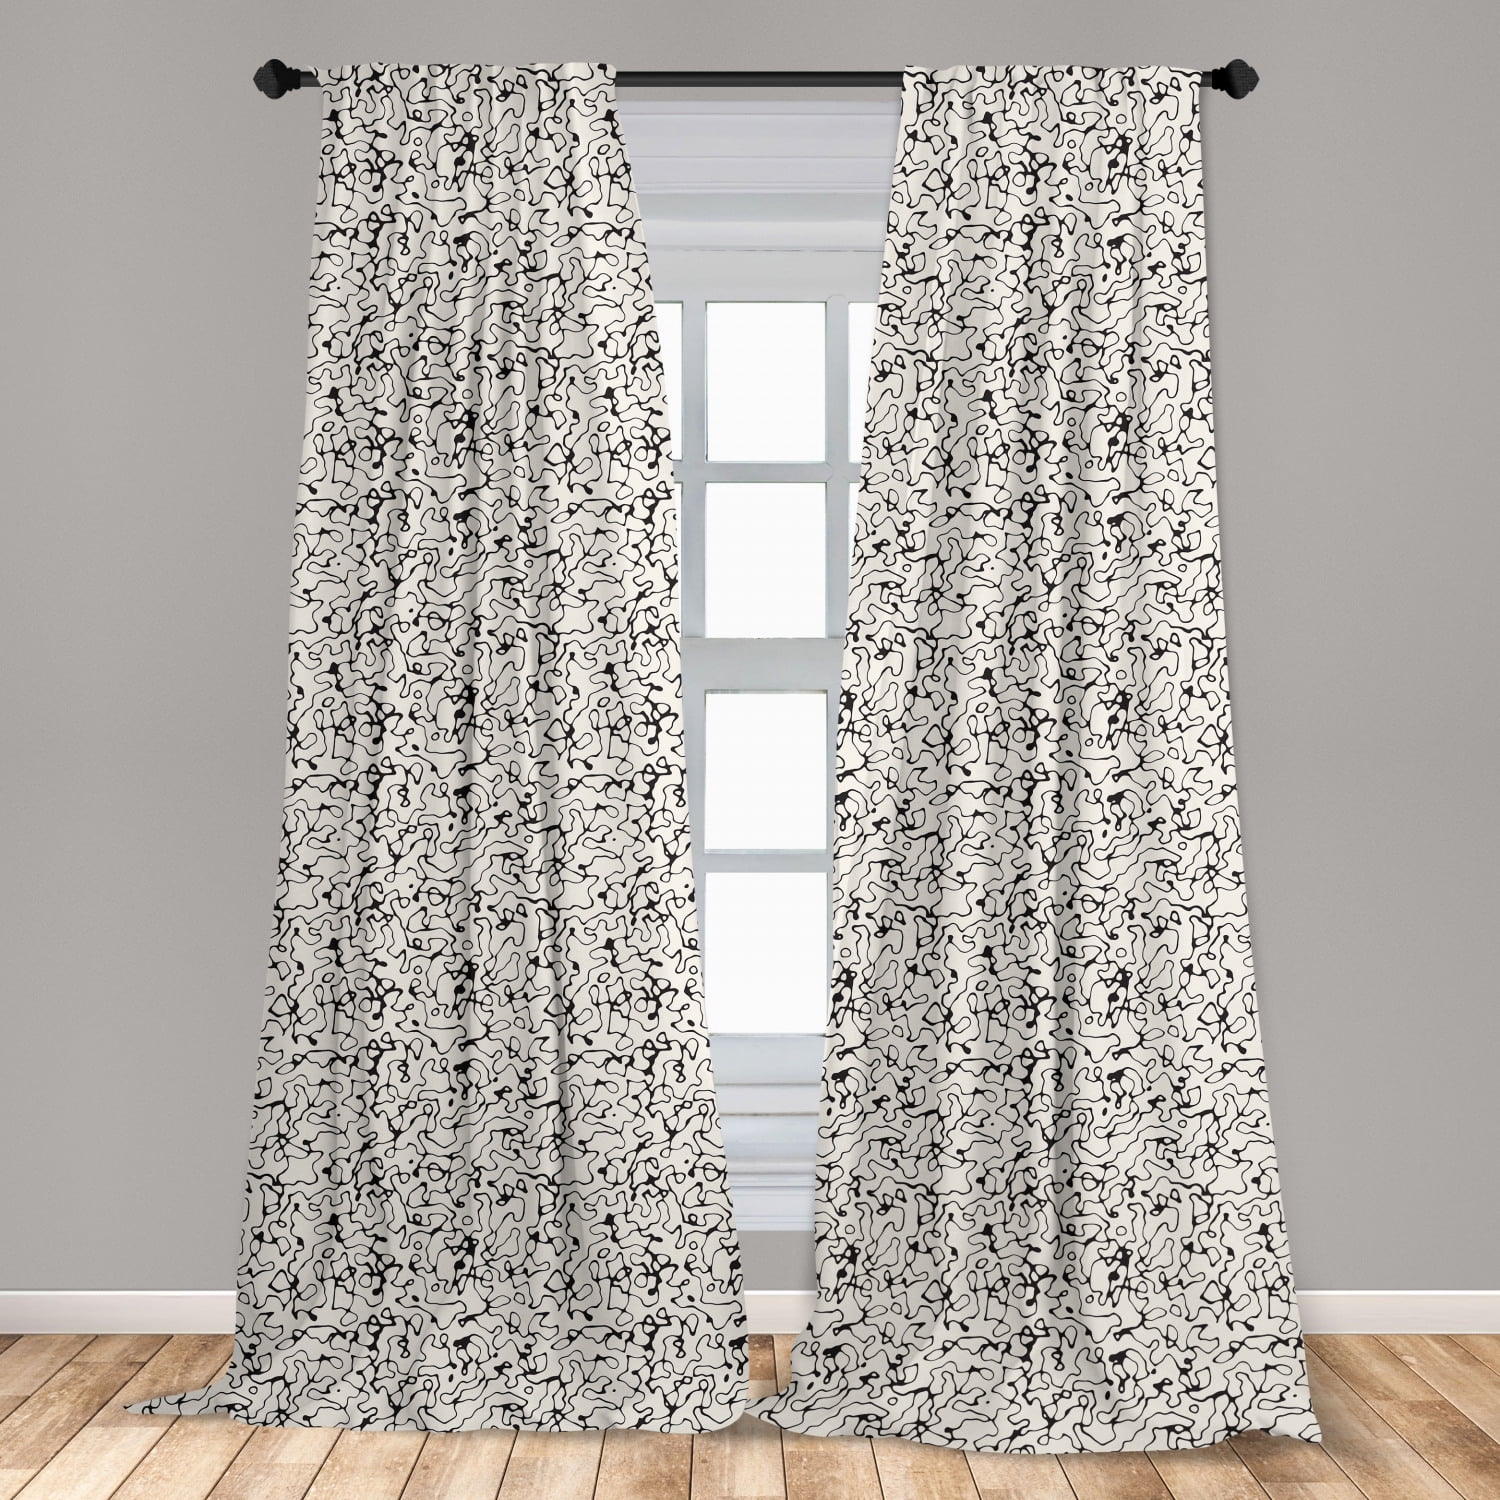 Leaf Curtains 20 Panels Set, Black and White Pattern with Swirled Skinny  Branches with Leaves Old Fashioned Scroll, Window Drapes for Living Room ... Ideas